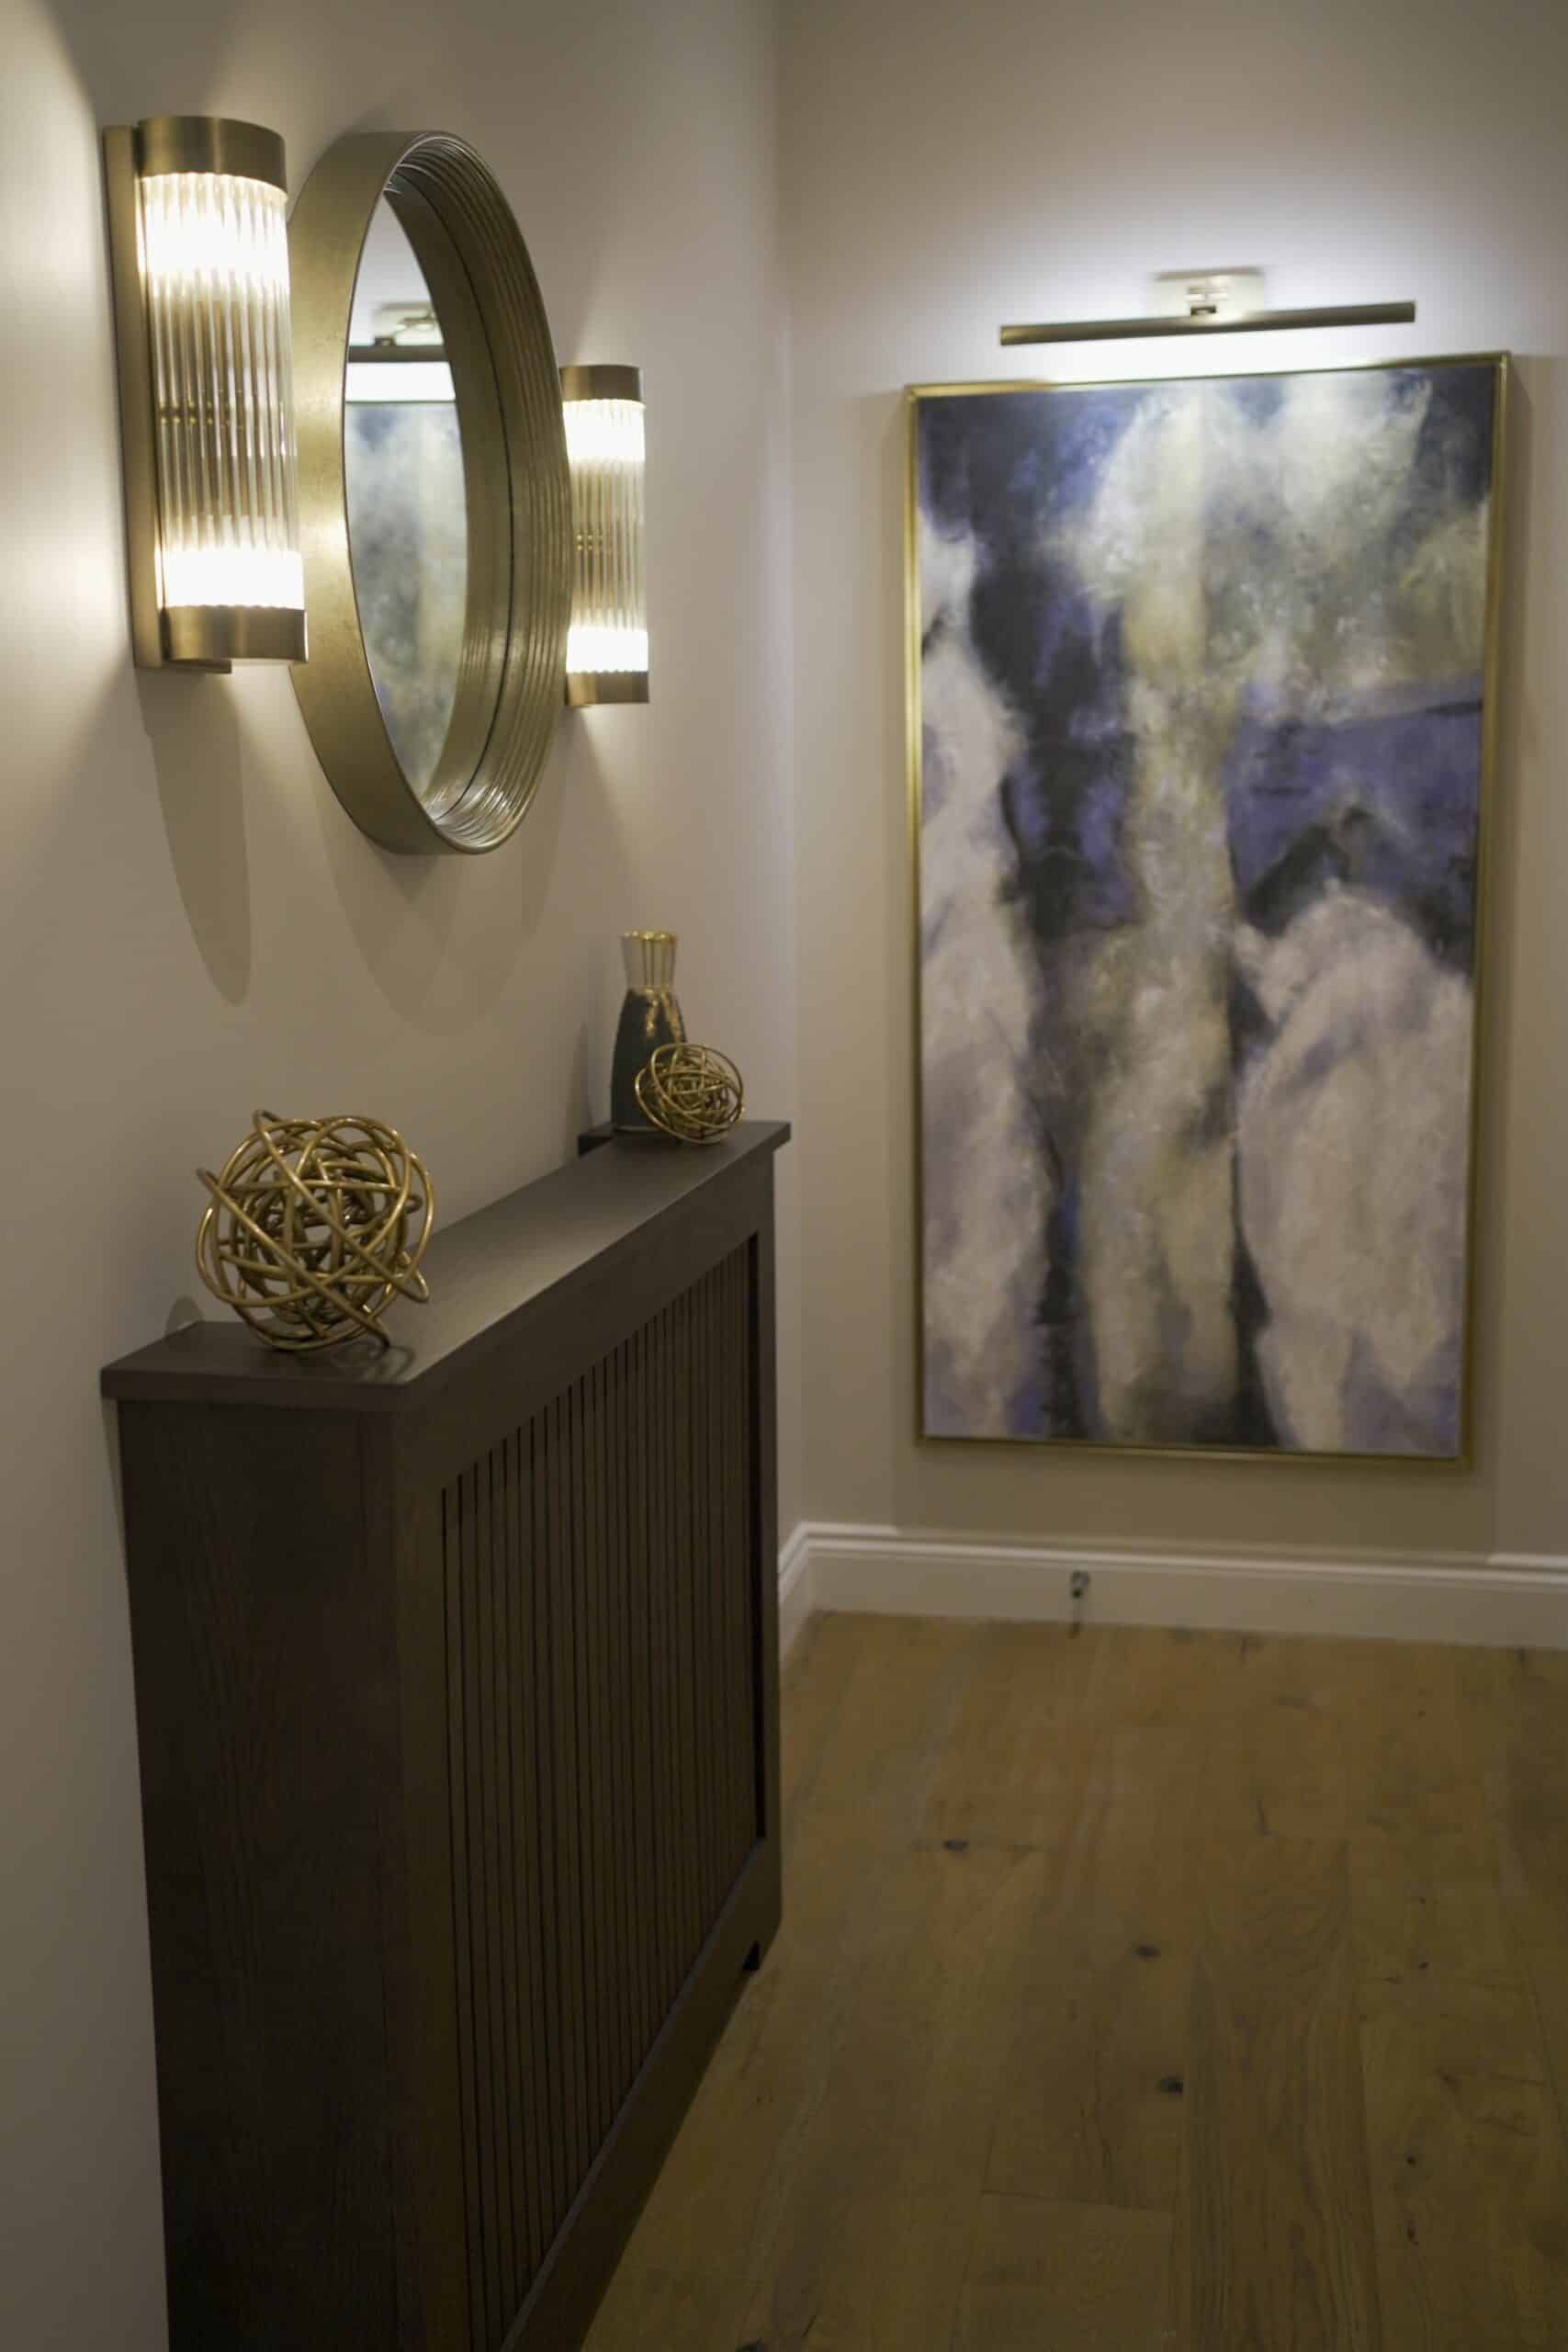 Neutral-coloured hallway with bespoke radiator cover, rounded mirror, tubular wall lights and modern art on the walls